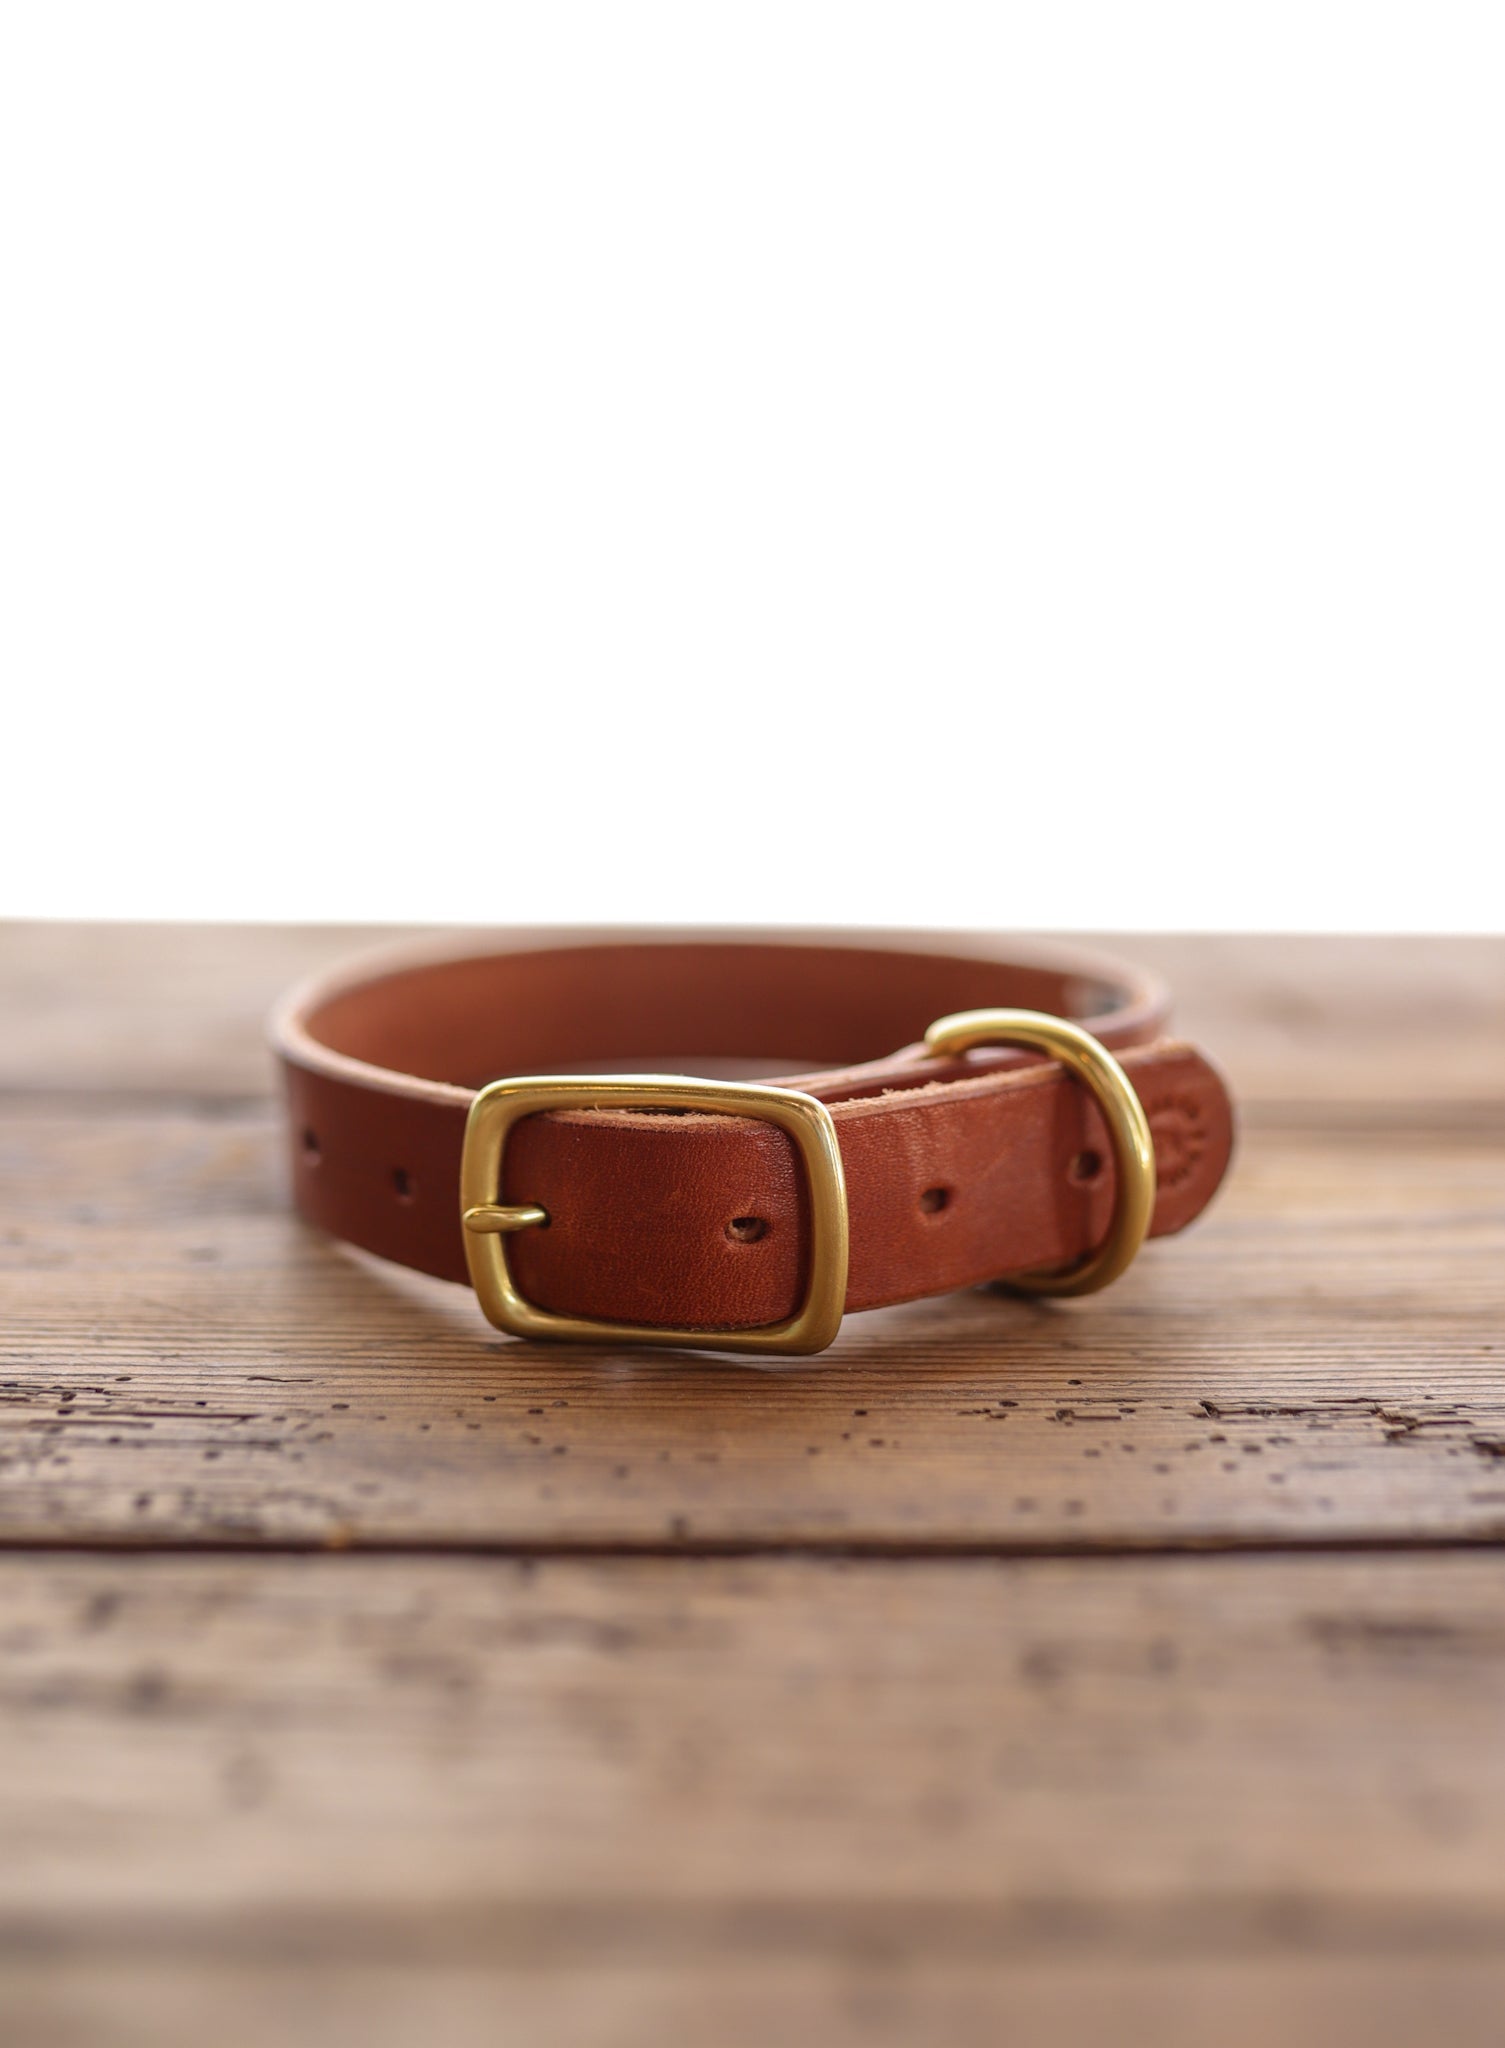 Leather Dog Collar | Ballad Of The Bird - Large Goods Made